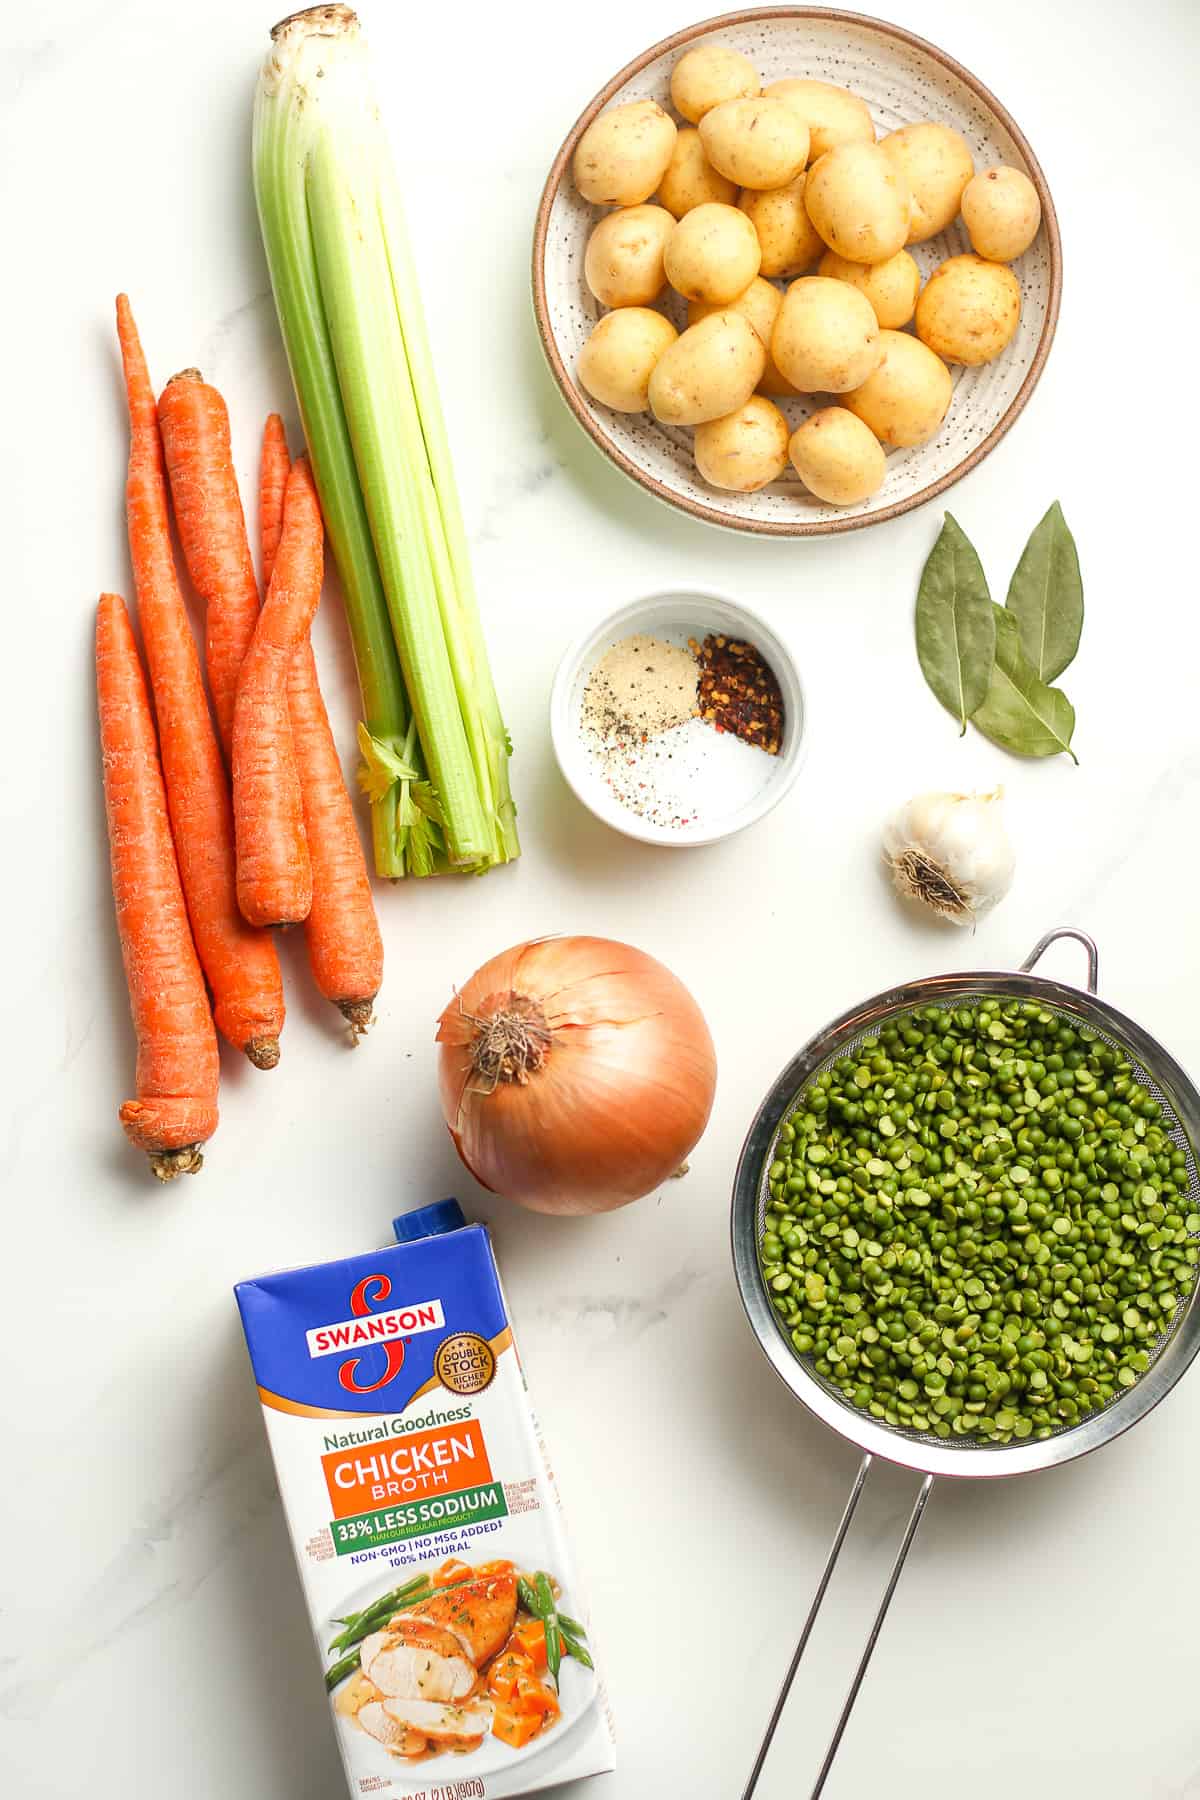 The ingredients for split pea vegetable soup.